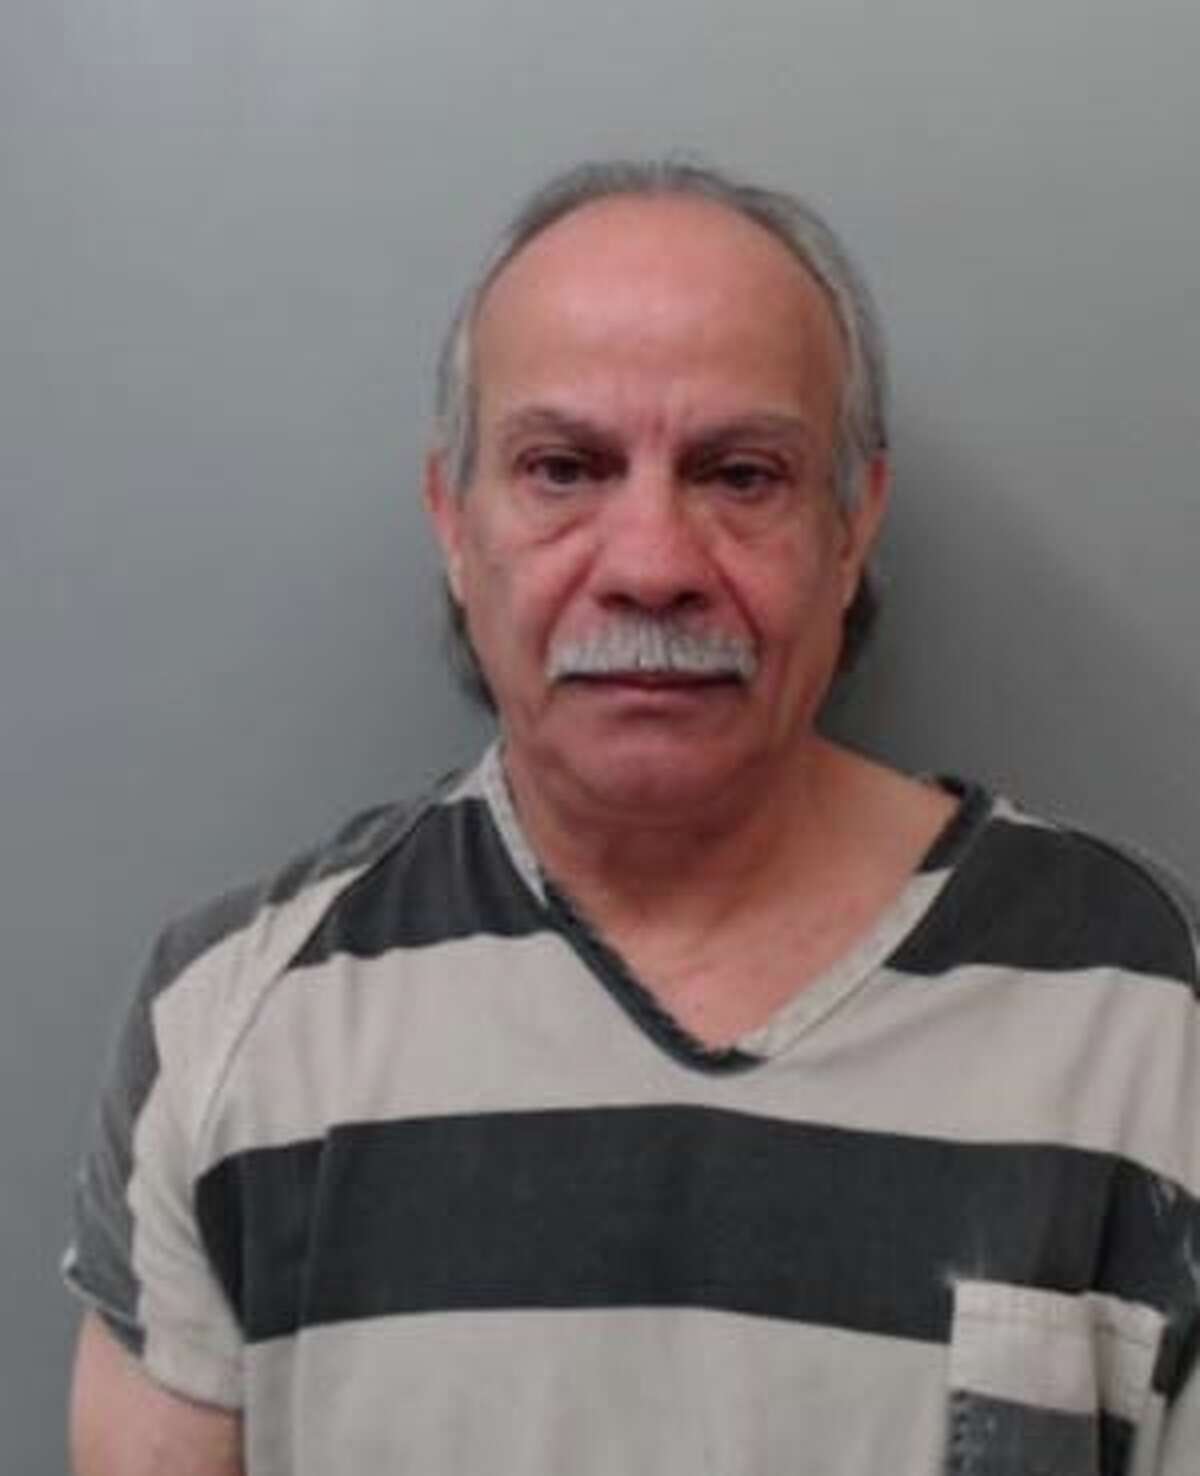 Eric John Hale, 60, was charged with assault, family violence on Monday.